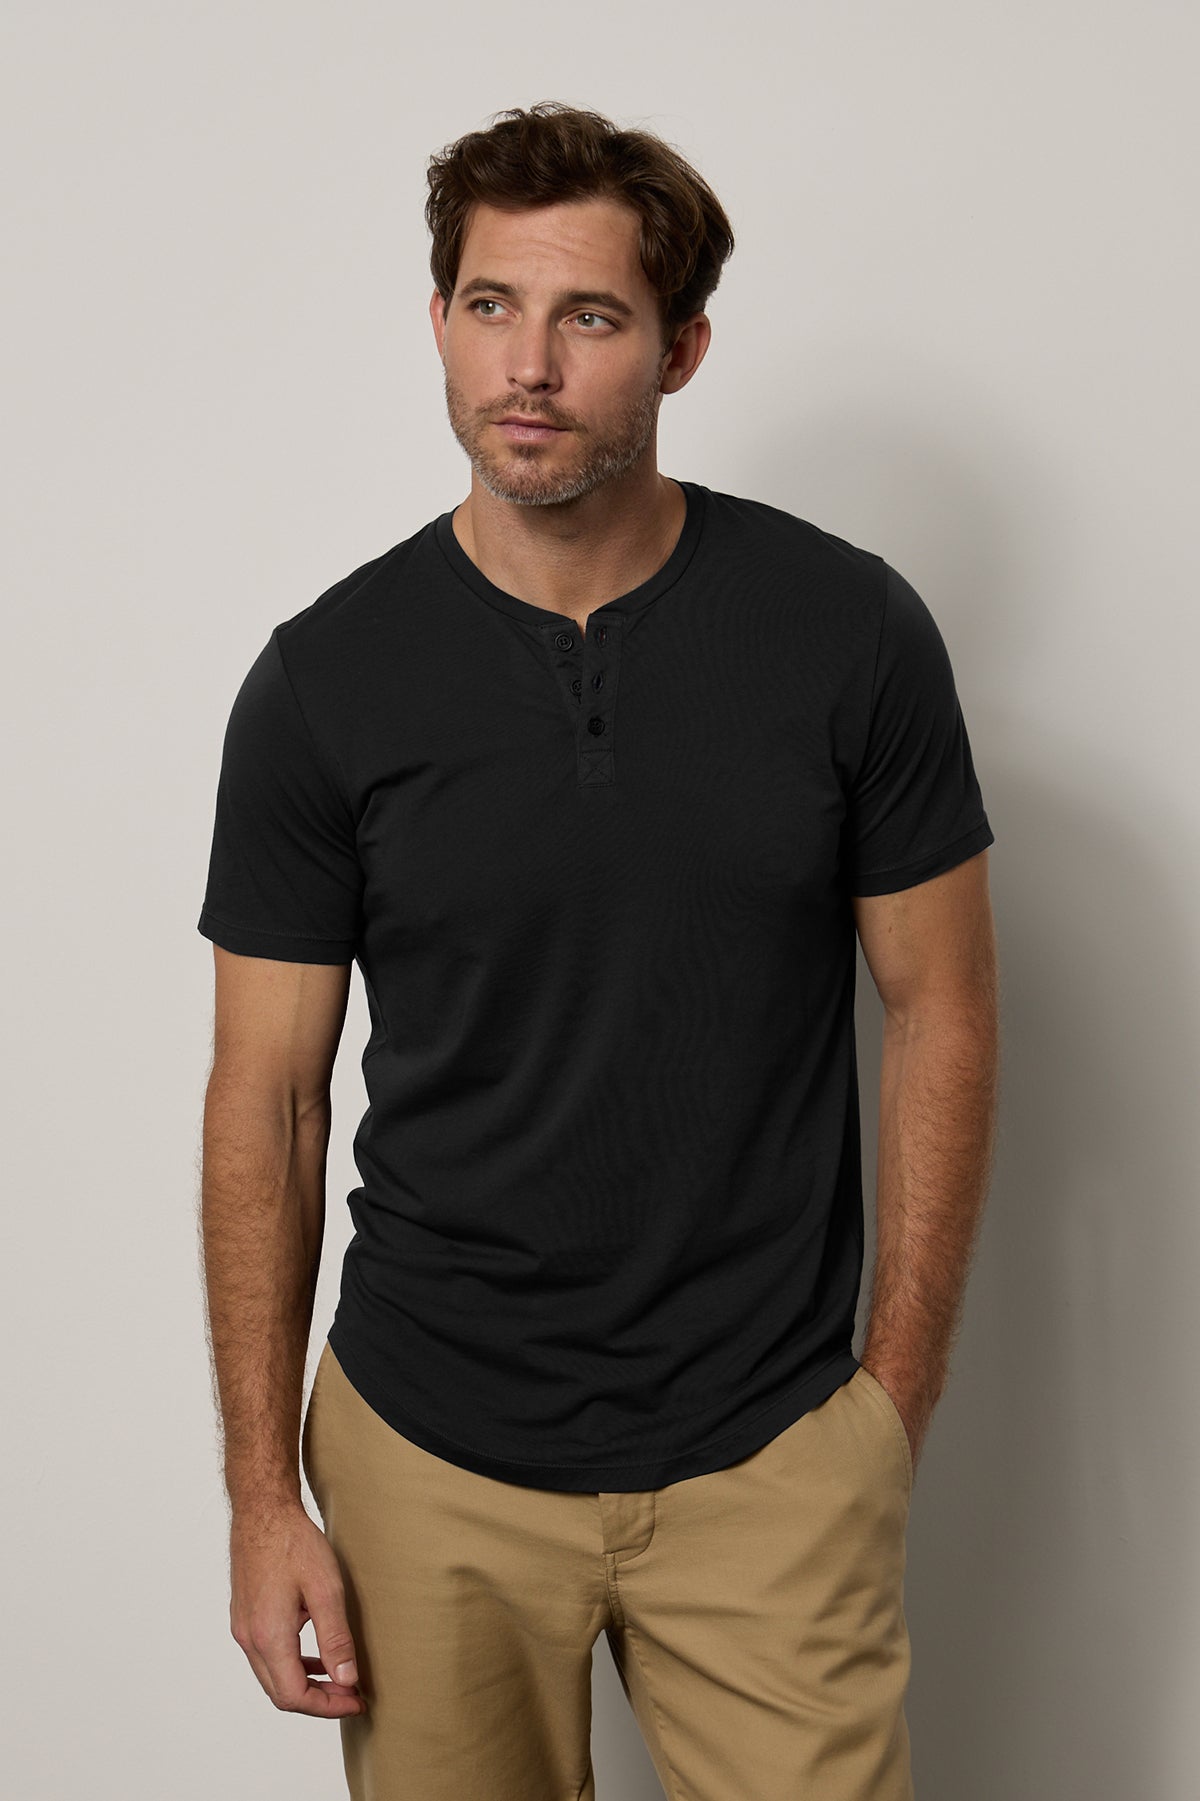 Fulton Short Sleeve Henley in black with Aiden pant in khaki front-25943764172993